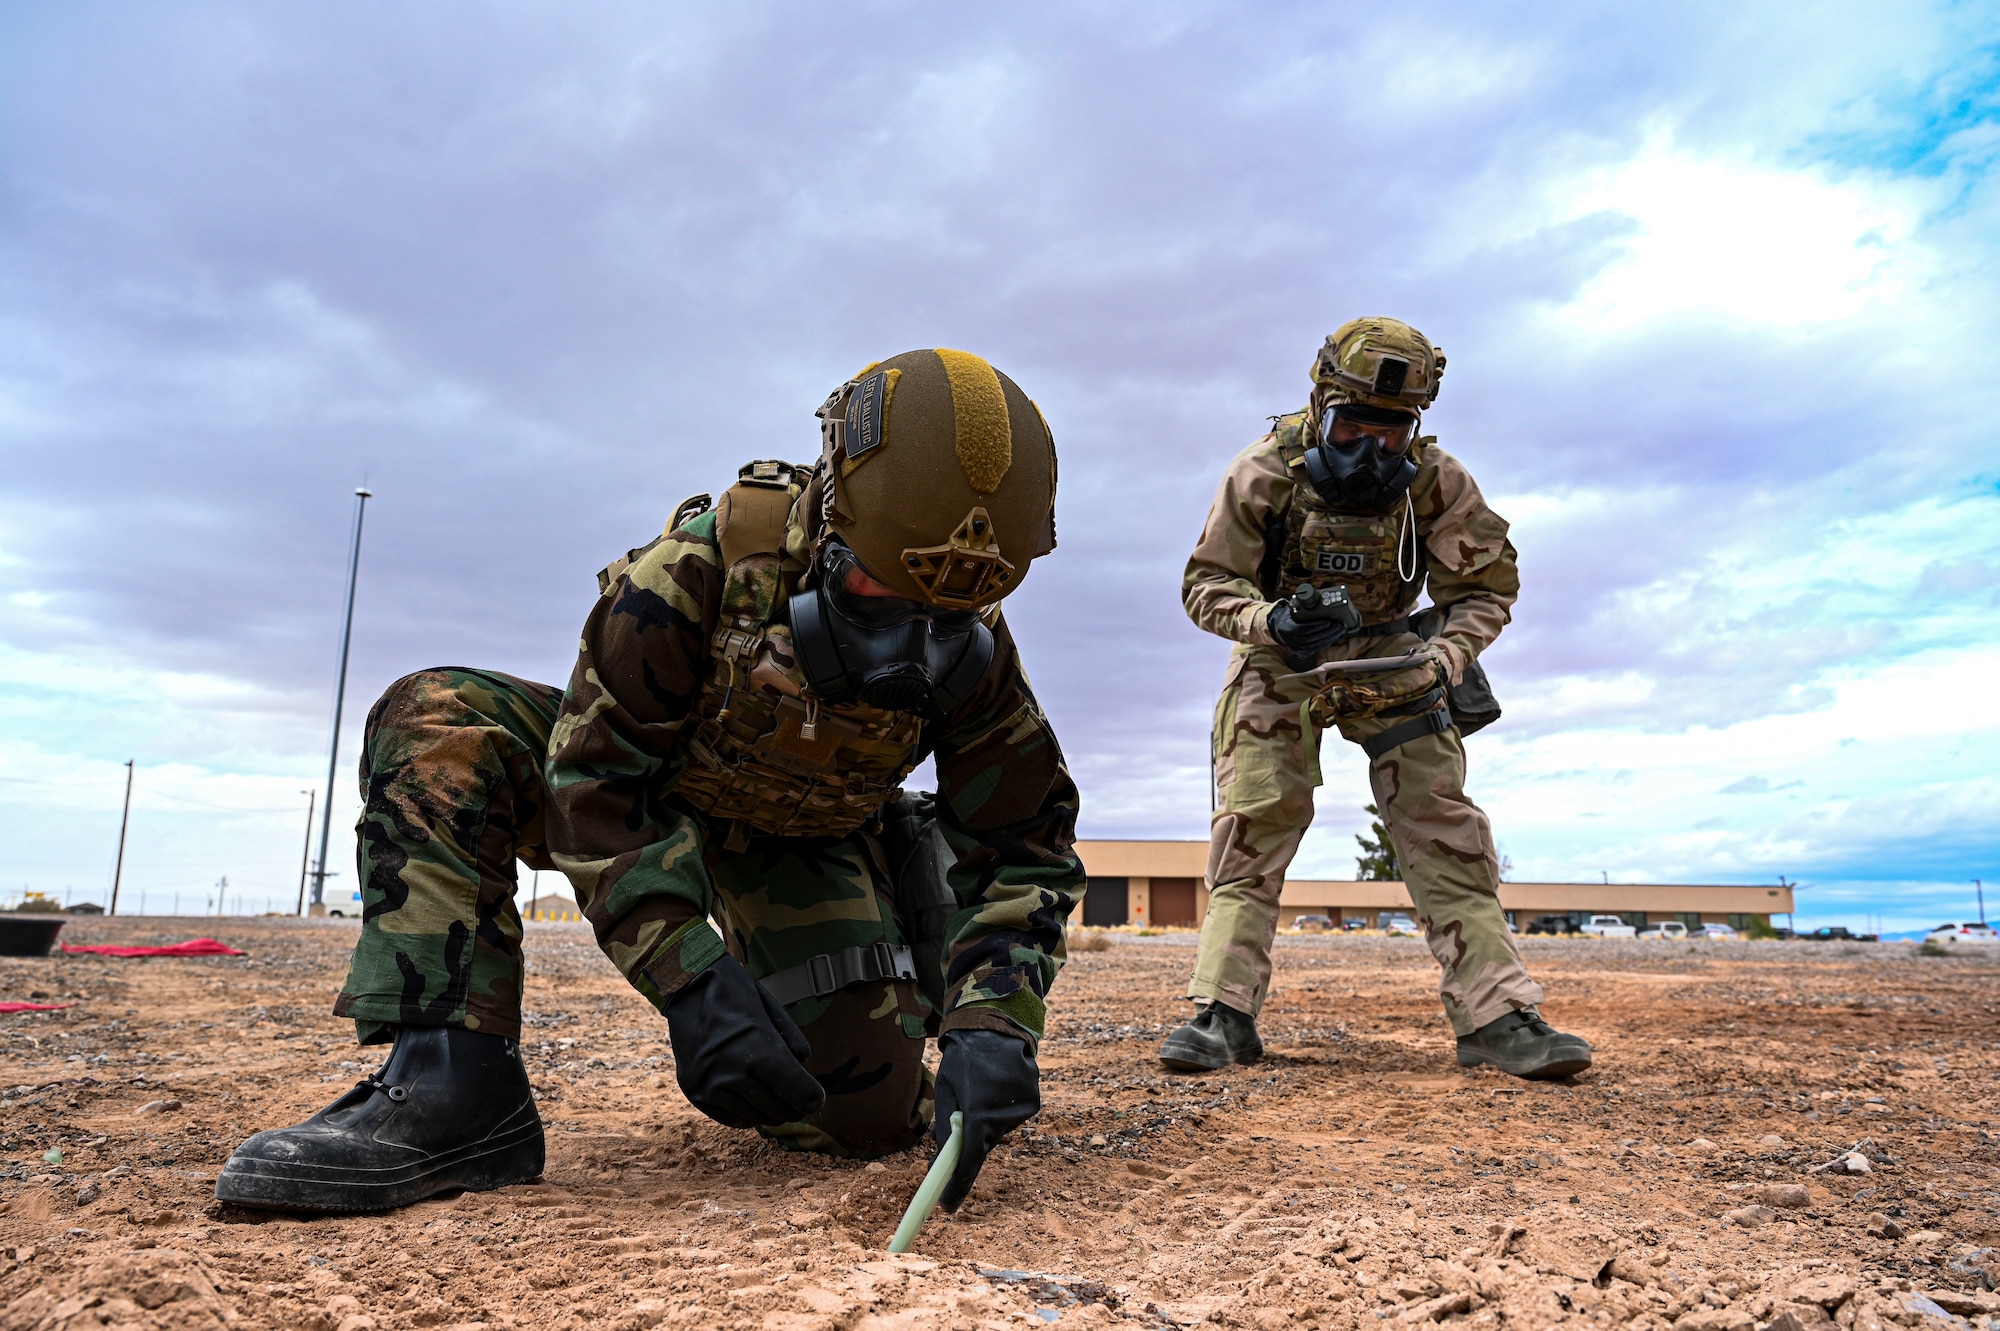 U.S. Air Force Senior Airman Danielle Alpi, left, and U.S. Air Force Airman 1st Class Spencer Pettingill, 49th Civil Engineer Squadron explosive ordnance disposal apprentices, dig up a mock M23 chemical landmine during a chemical munition decontamination exercise at Holloman Air Force Base, New Mexico, March 23, 2023. The 49th CES EOD flight constantly trains for different scenarios to better prepare for any extreme situations that they may encounter. (U.S Air Force photo by Airman 1st Class Isaiah Pedrazzini)